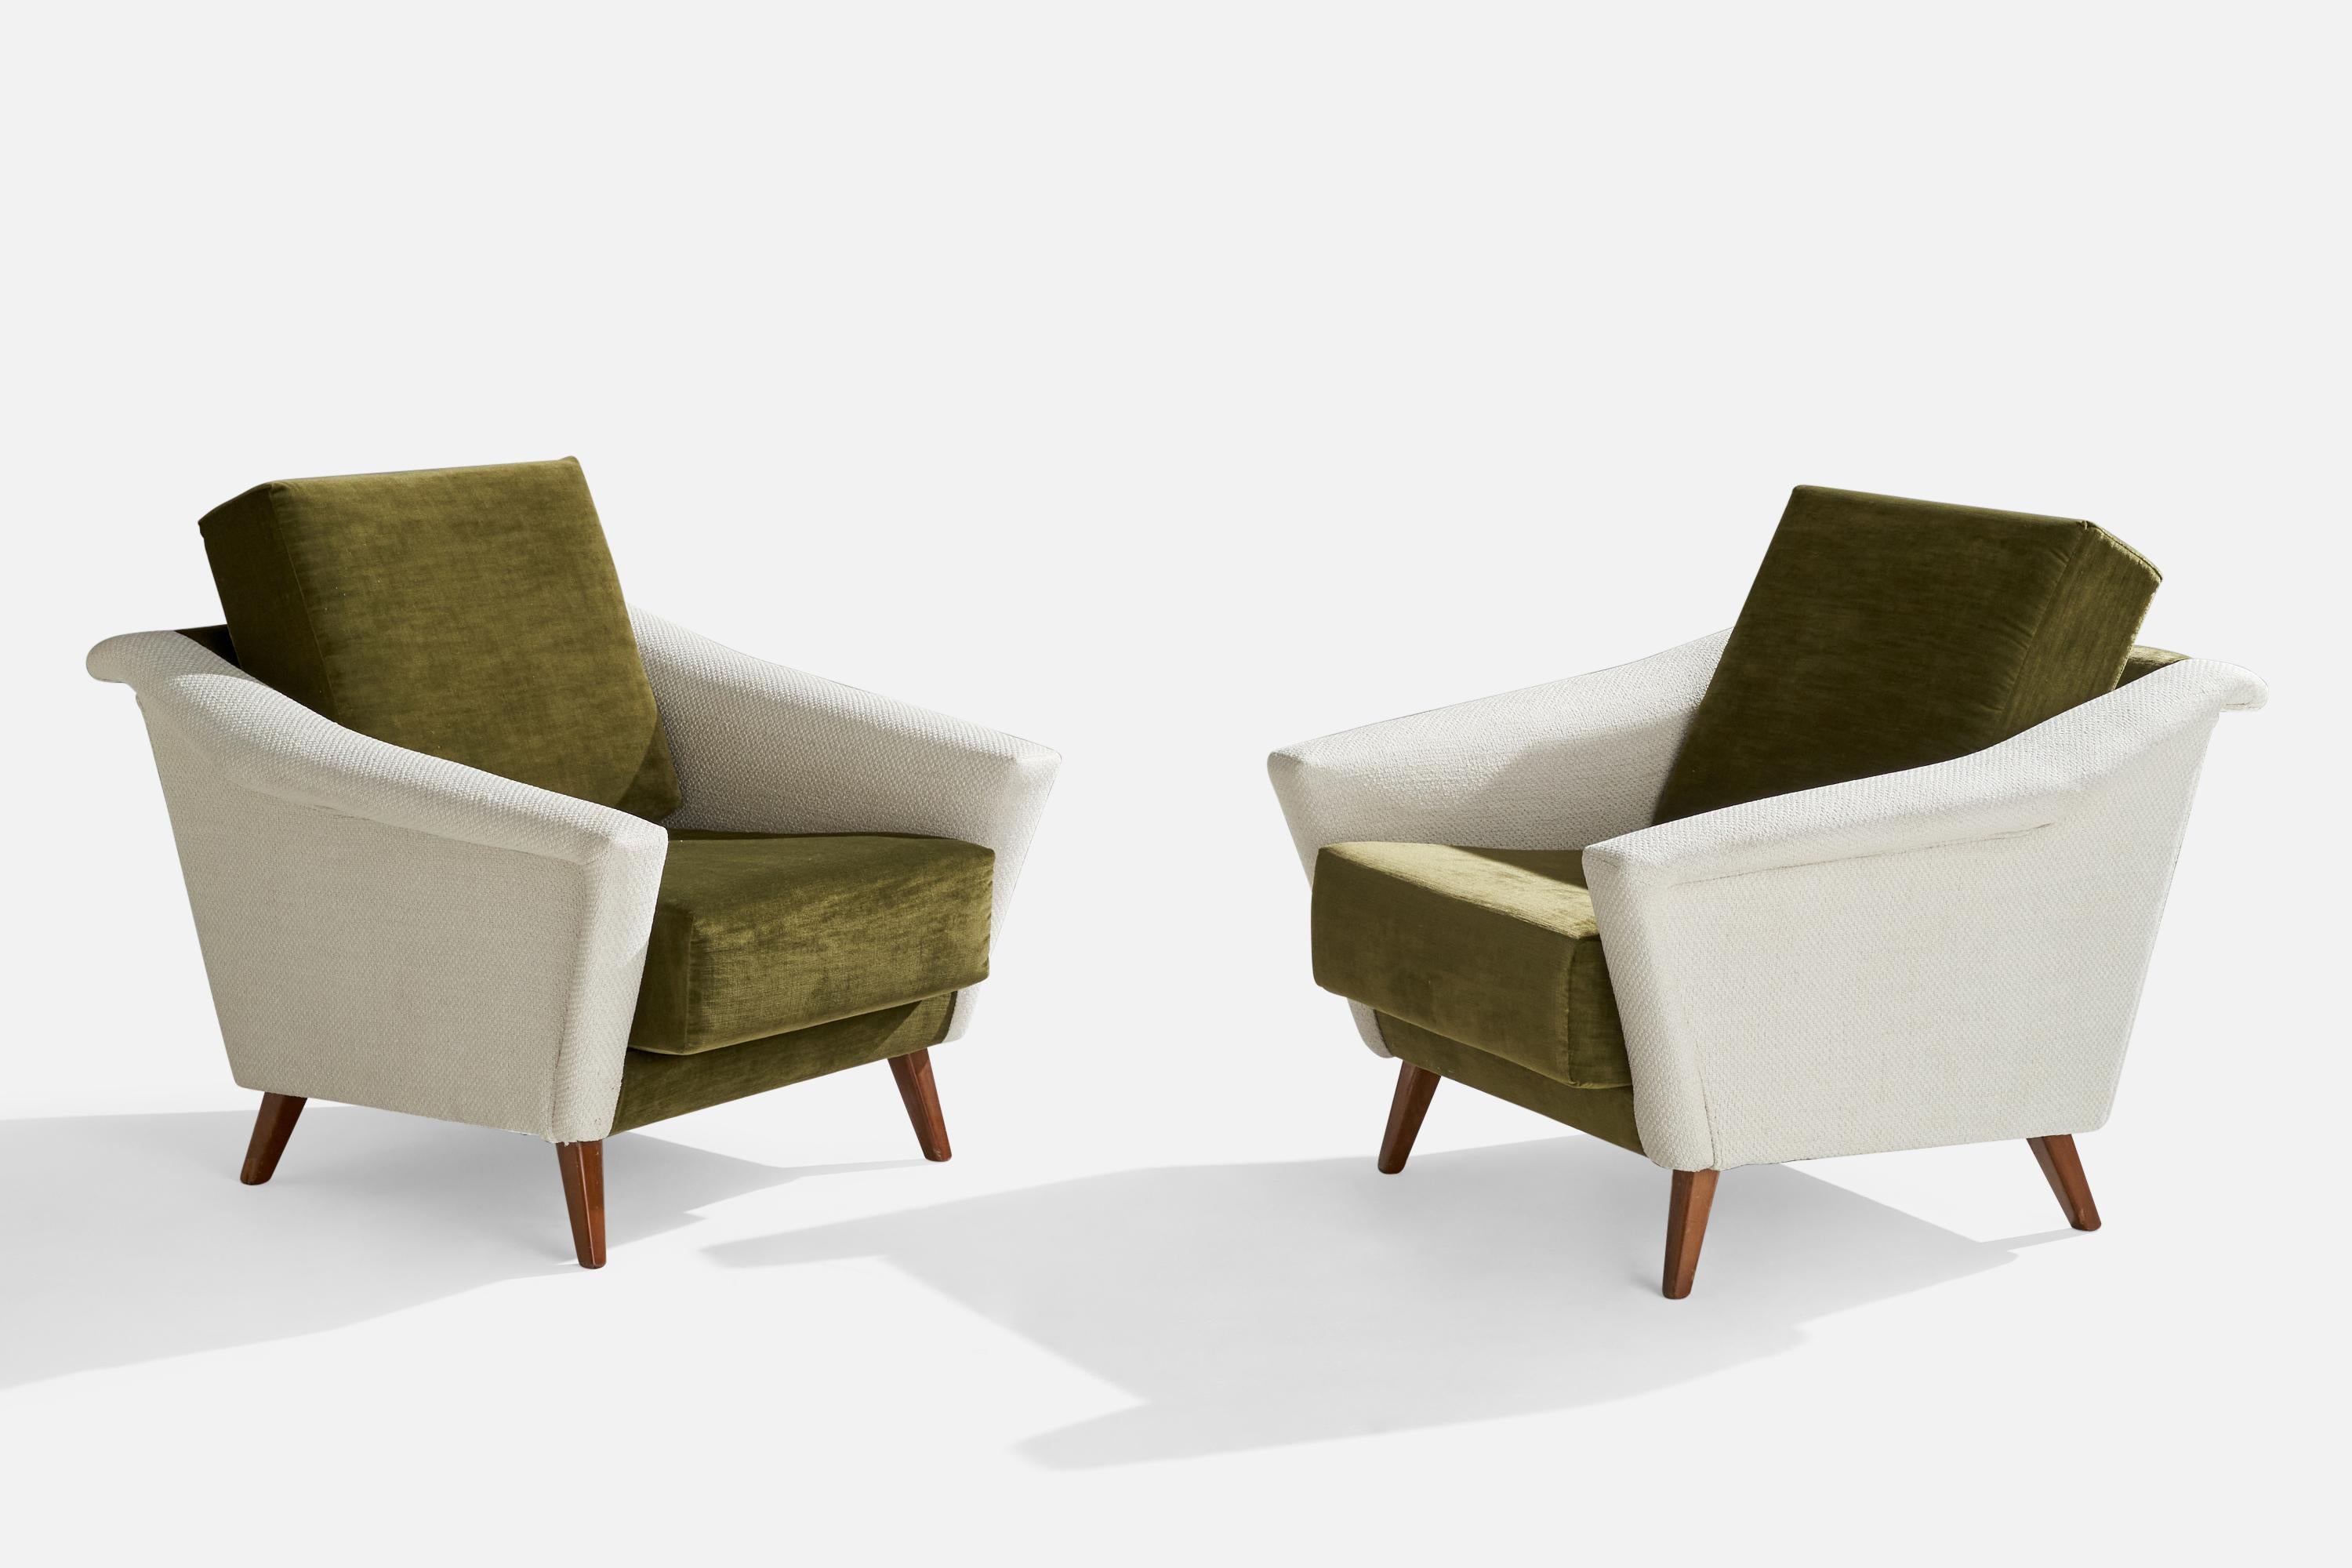 A pair of white fabric, green velvet and walnut lounge chairs designed and produced in Italy, 1950s.

Seat height 16”.